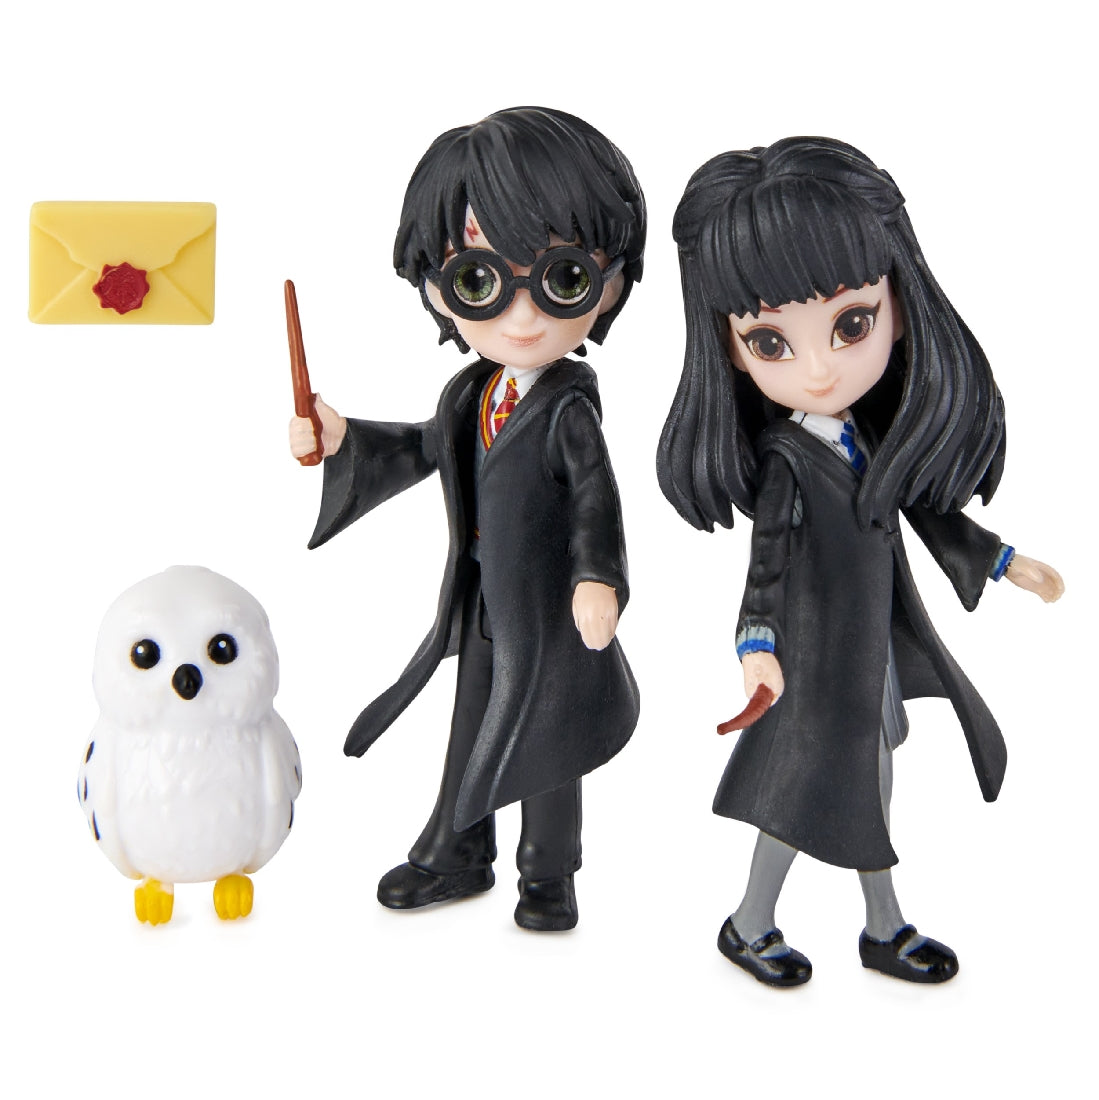 HARRY POTTER MAGICAL MINIS - HARRY & CHO CHANG FRIENDSHIP SET